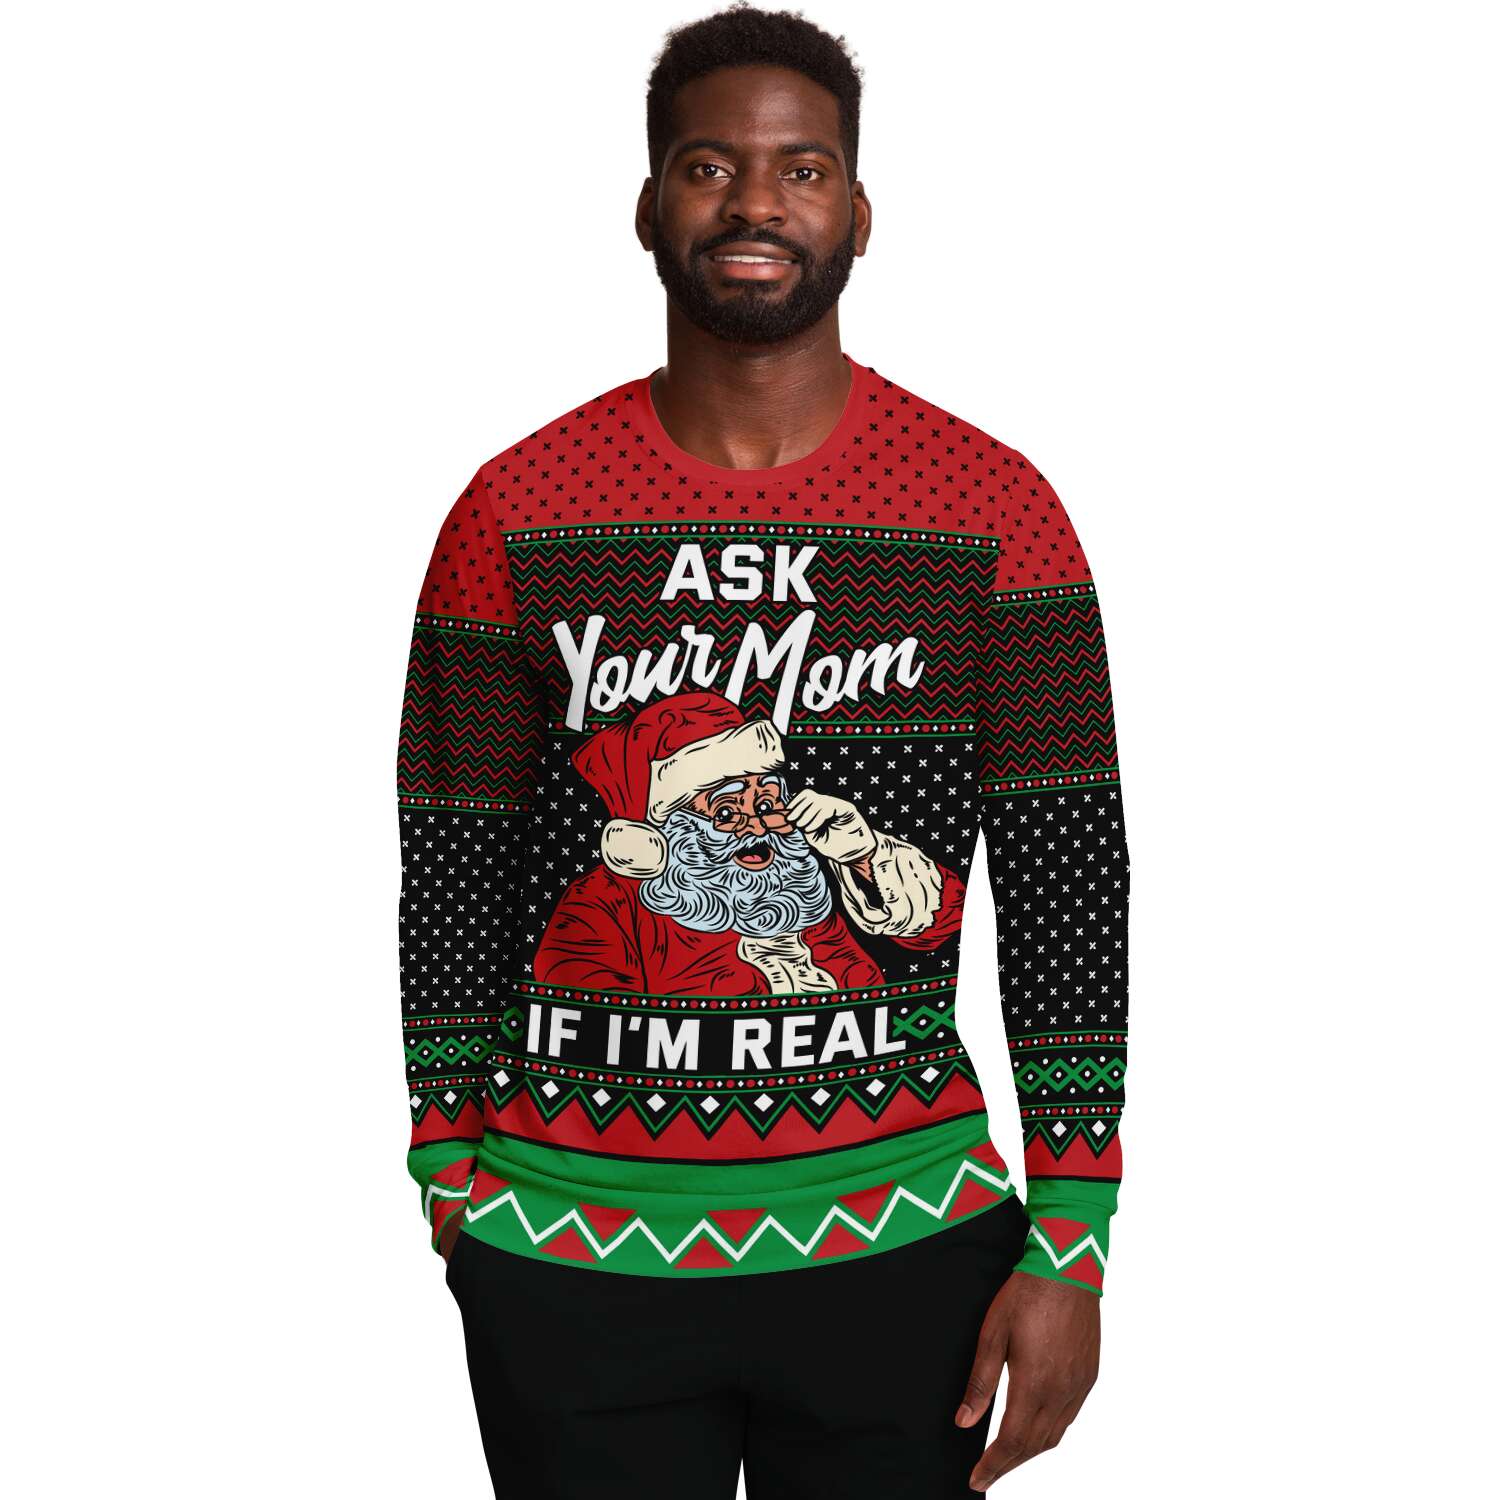 Ask Your Mom if Im Real Sweatshirt | Unisex Ugly Christmas Sweater, Xmas Sweater, Holiday Sweater, Festive Sweater, Funny Sweater, Funny Party Shirt